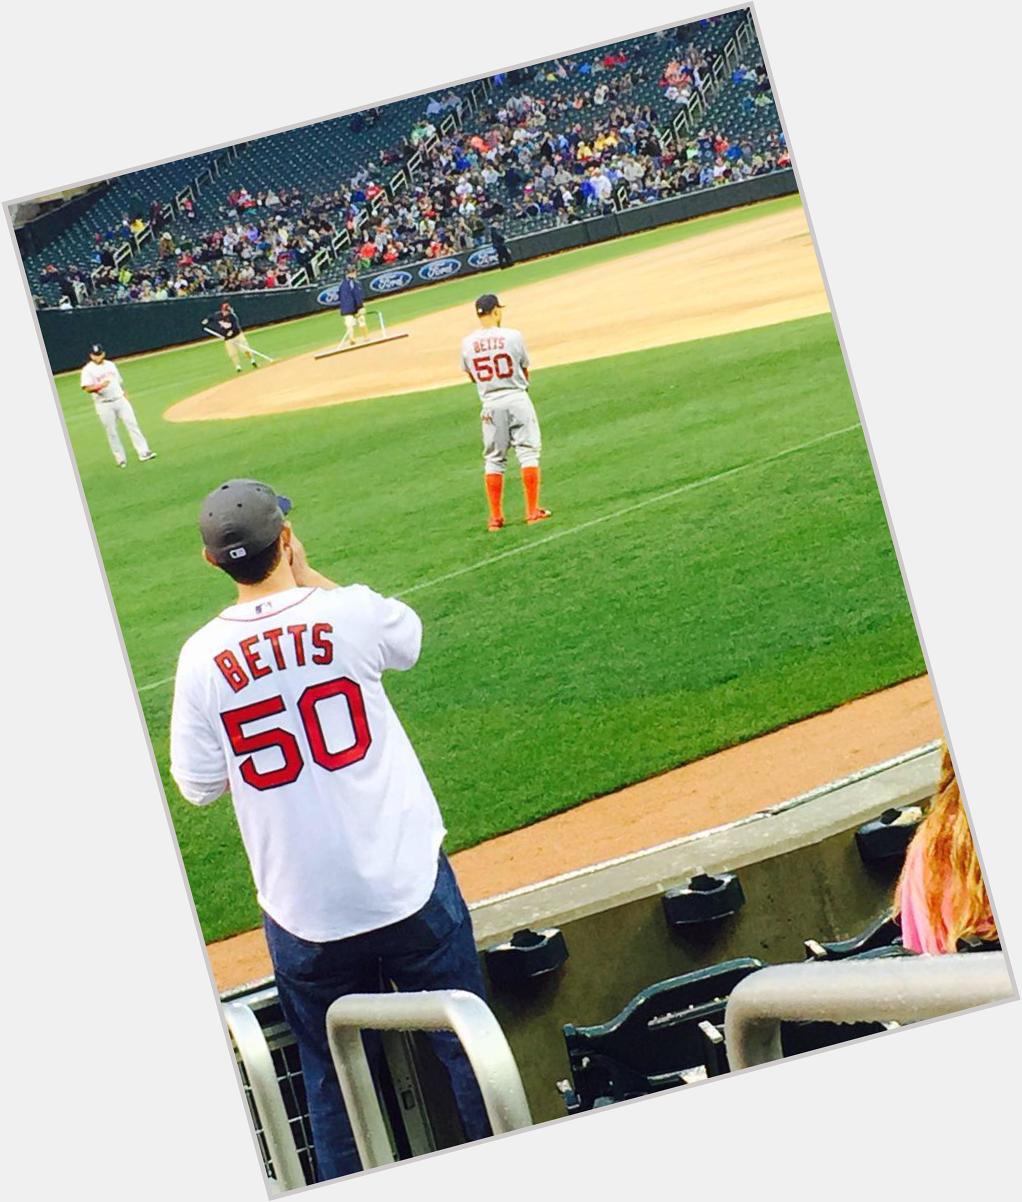  Happy Birthday to the future in Boston, Mookie Betts! How bout a RT/follow? Still your fav fan in MN! 